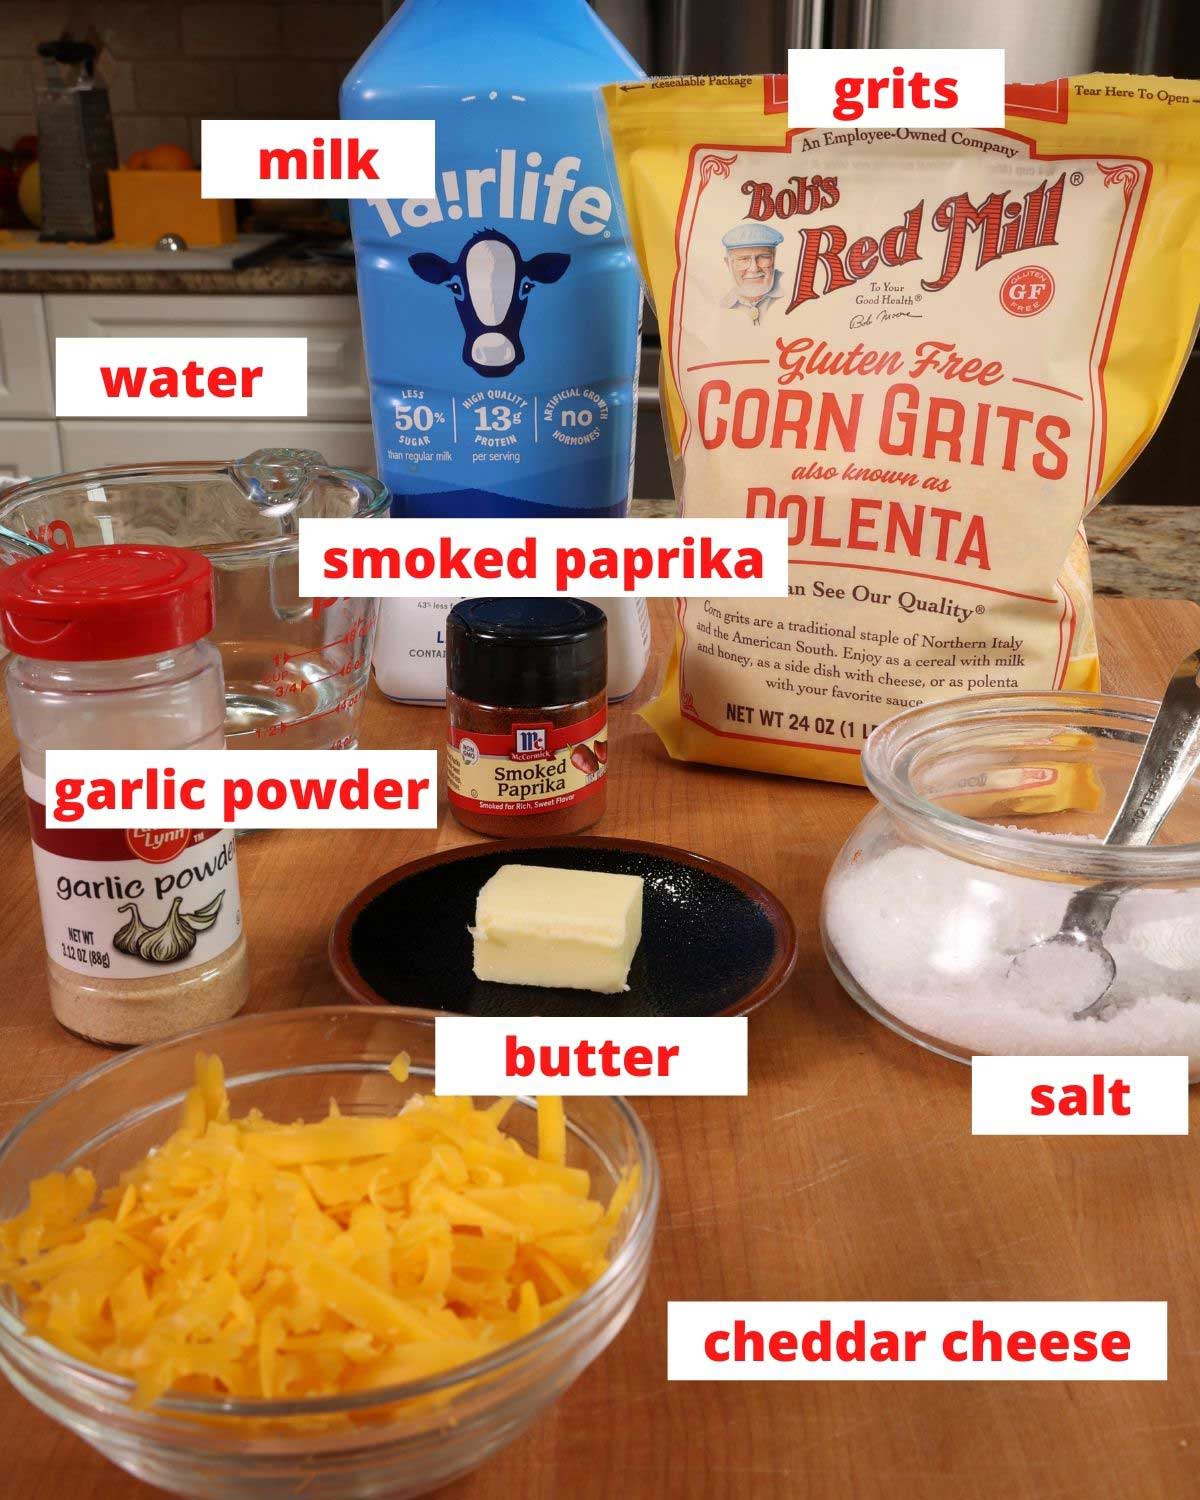 ingredients needed to make cheese grits on a brown table: cheese, grits, milk, spices,butter, and water.